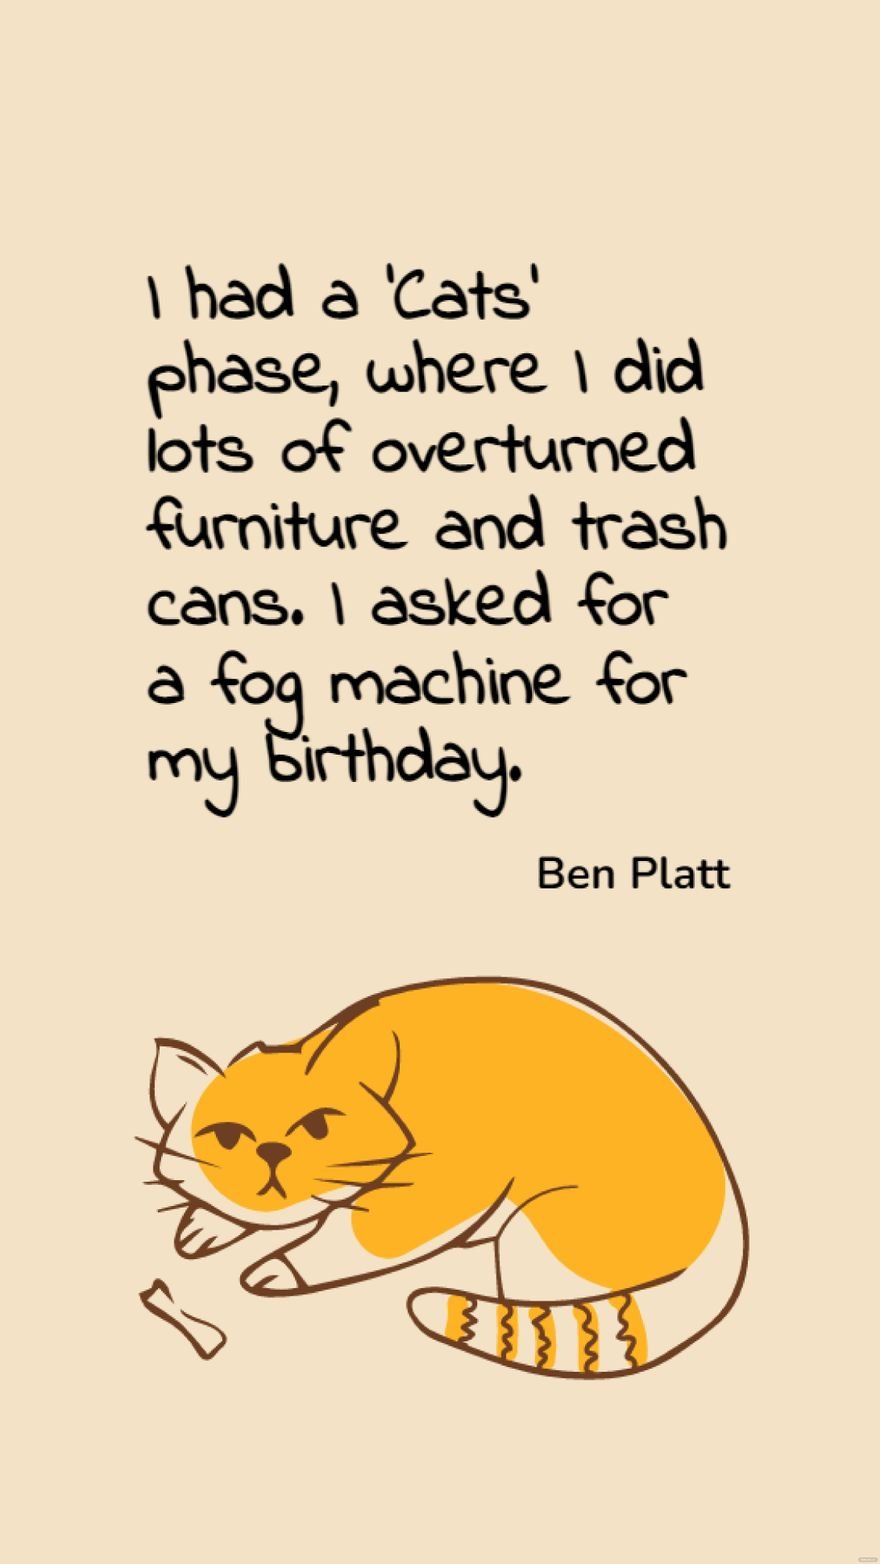 Ben Platt - I had a 'Cats' phase, where I did lots of overturned furniture and trash cans. I asked for a fog machine for my birthday.